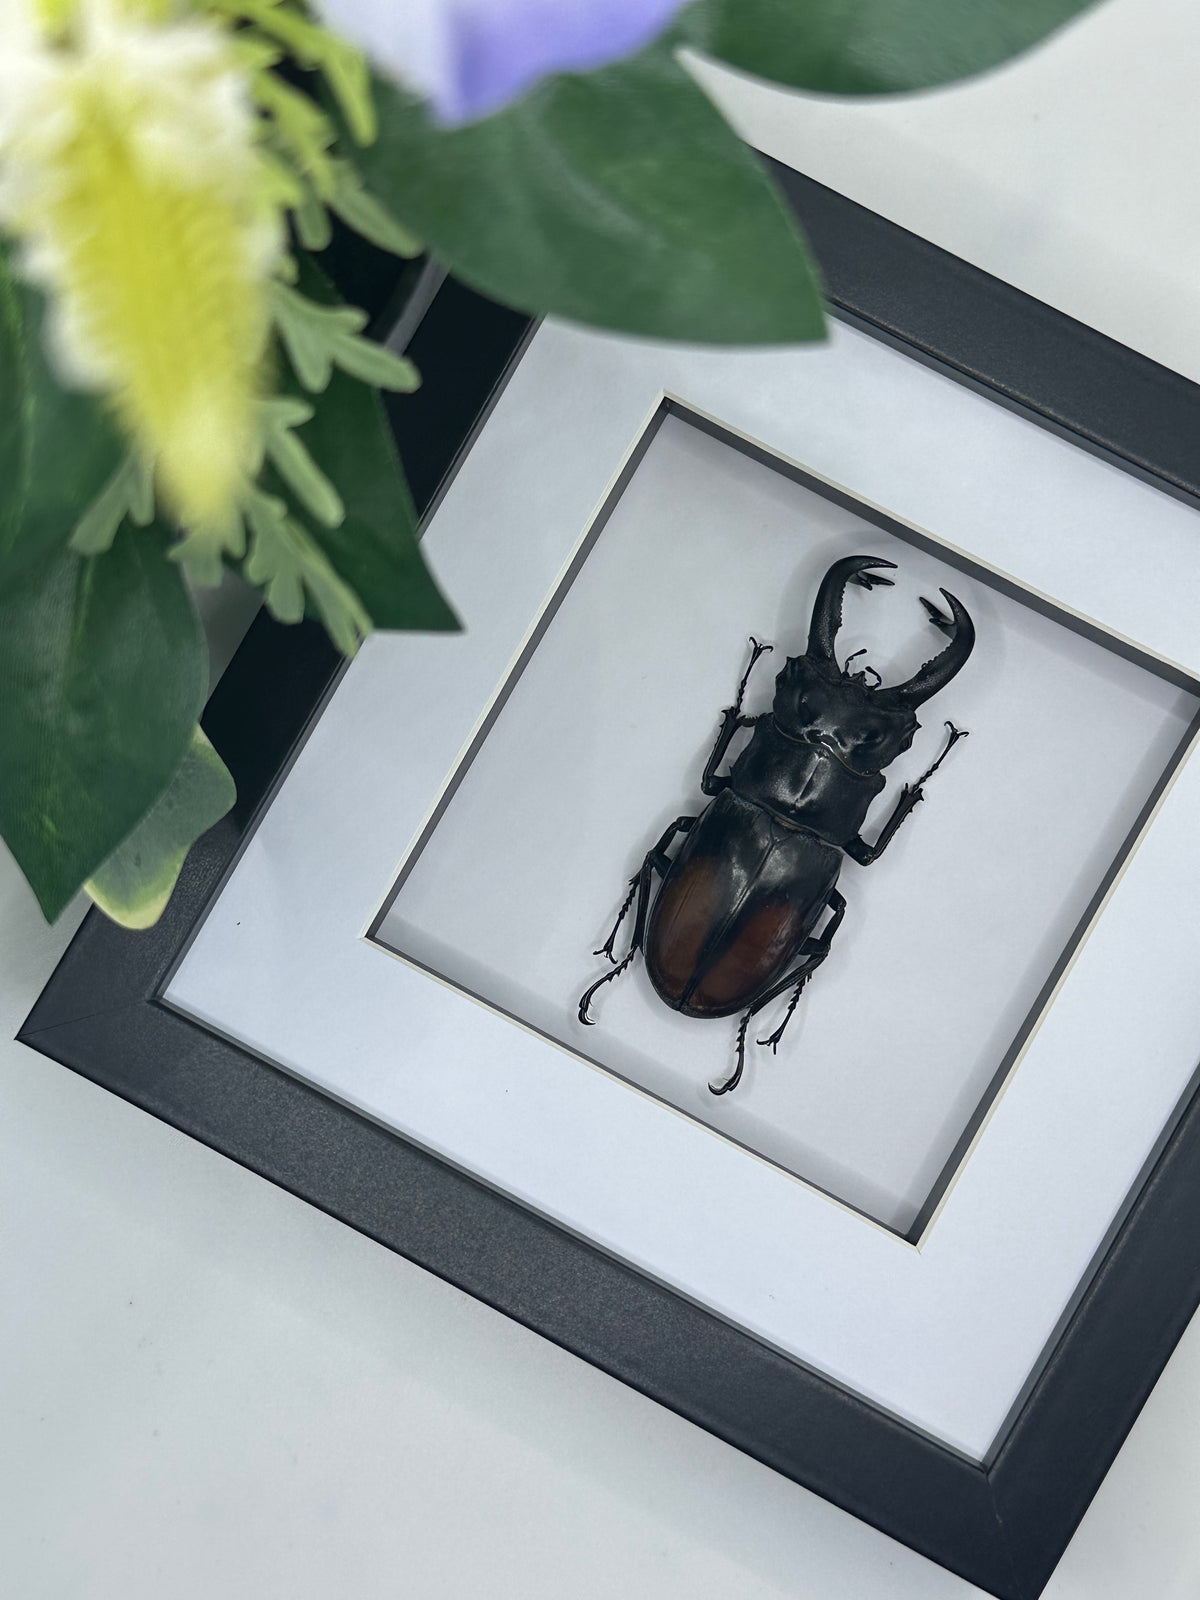 Fighting Giant Stag Beetle / Hexarthrius Parryi in a frame